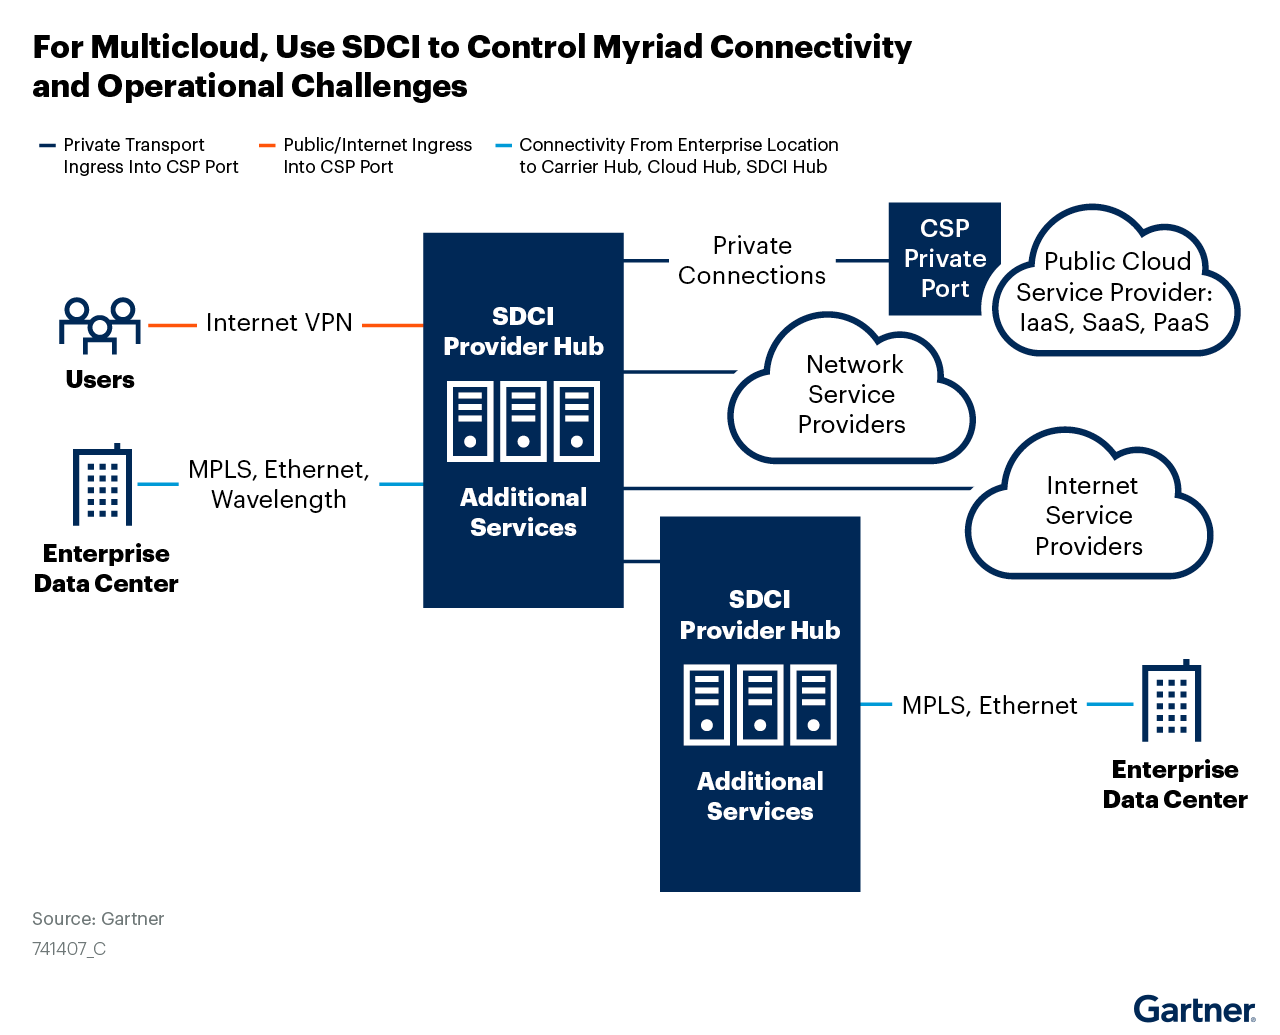 For Multicloud, Use SDCI to Control Myriad Connectivity and Operational Challenges